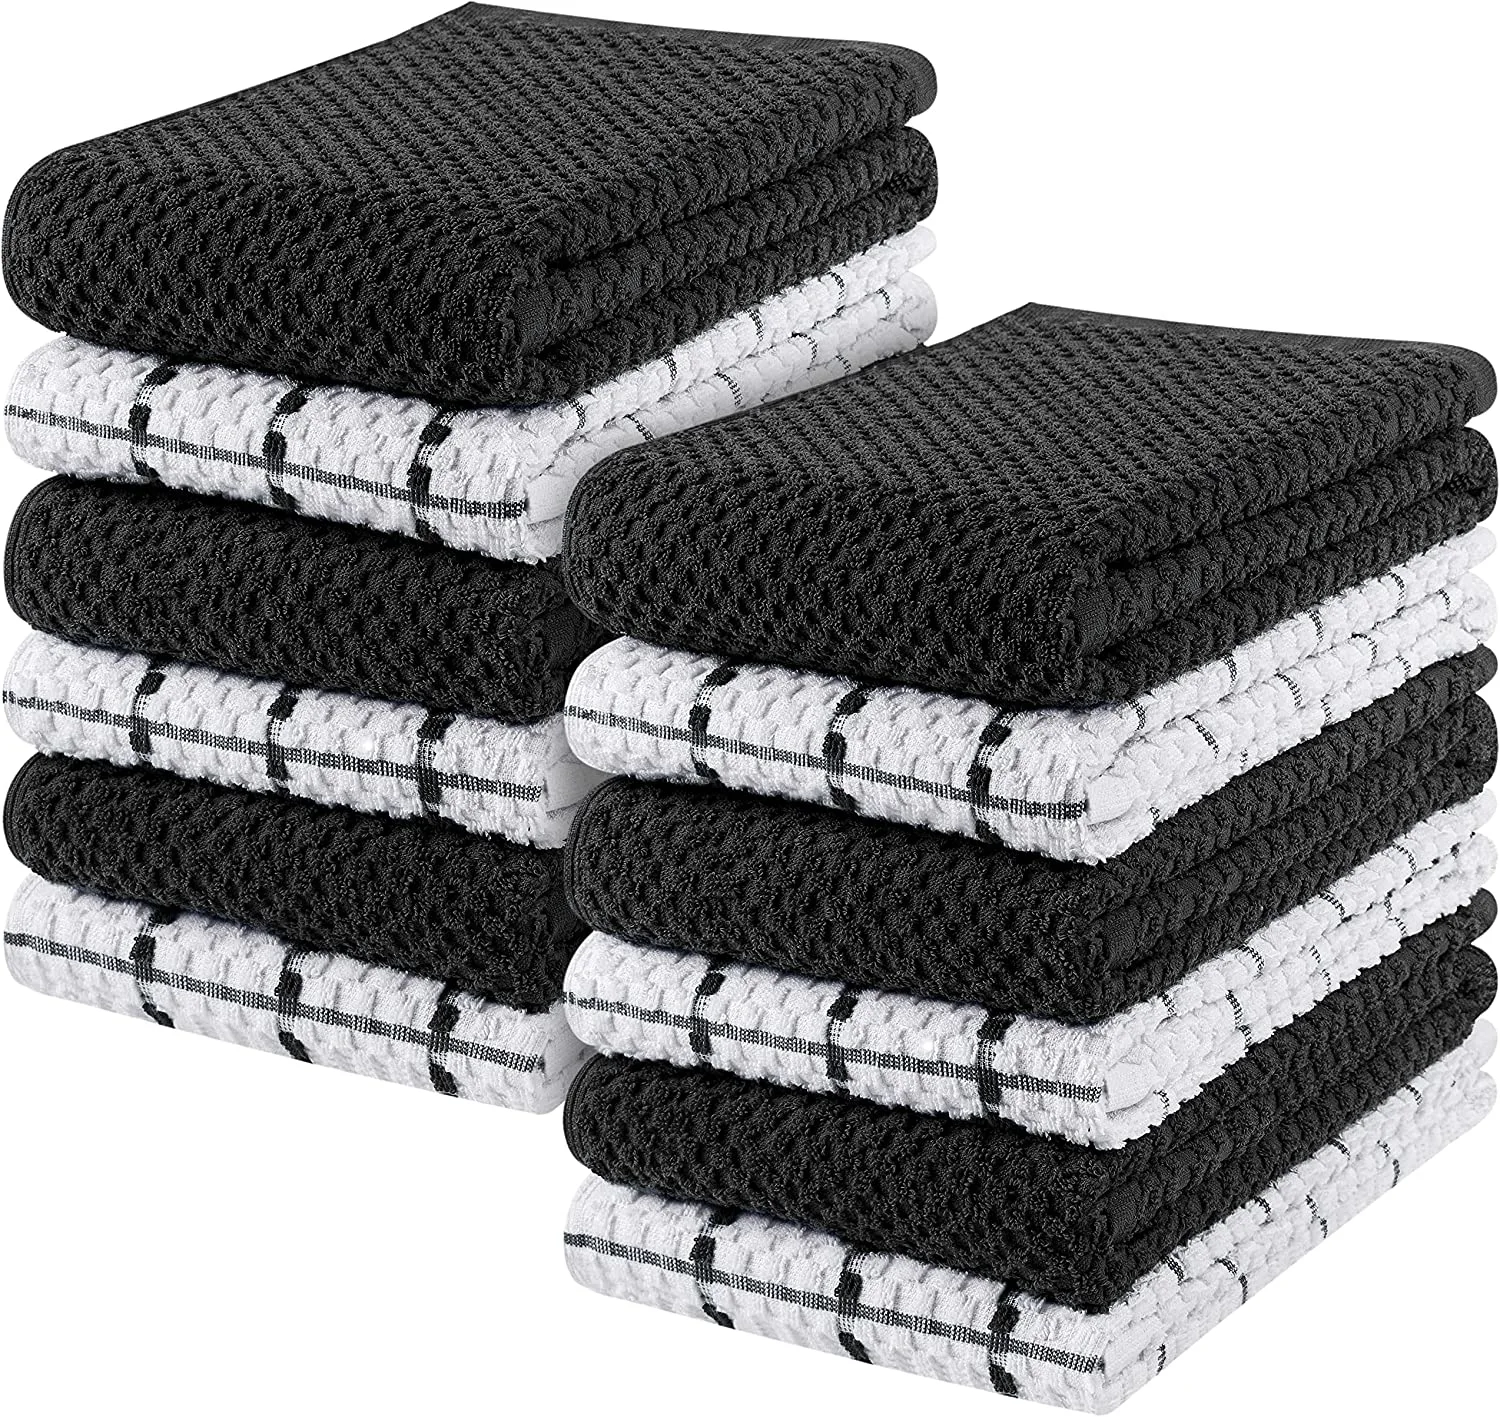 Kitchen Towels [12 Pack], 15 x 25 Inches, 100% Ring Spun Cotton Super Soft and Absorbent Linen Dish Towels, Tea Towels and Bar Towels Set (Black)